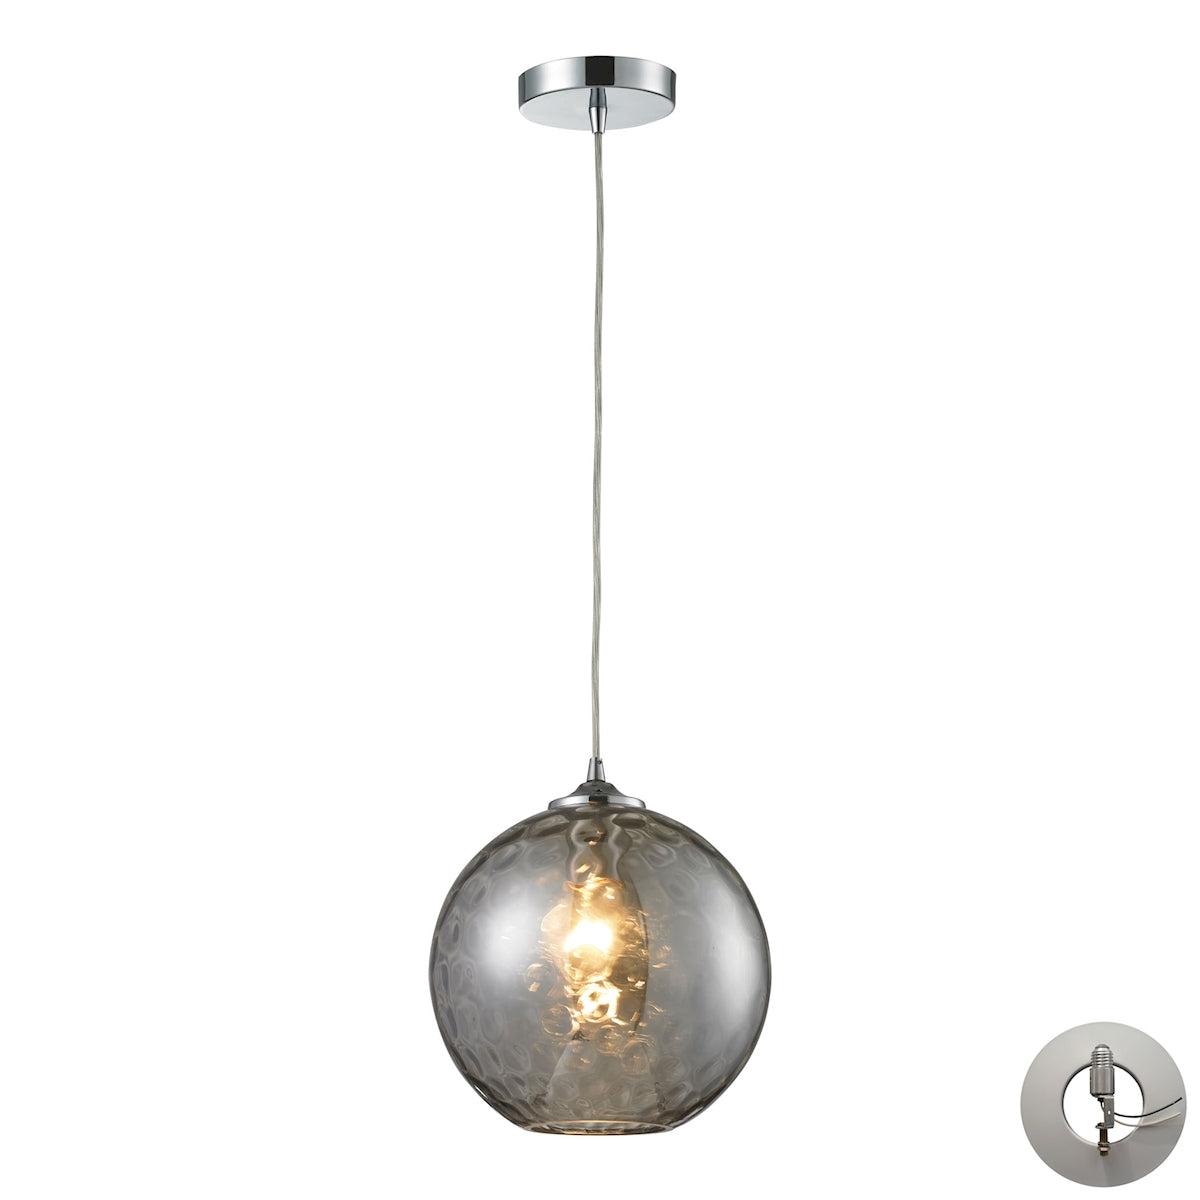 ELK Lighting 31380/1SMK-LA Watersphere 1-Light Mini Pendant in Chrome with Hammered Smoke Glass - Includes Adapter Kit